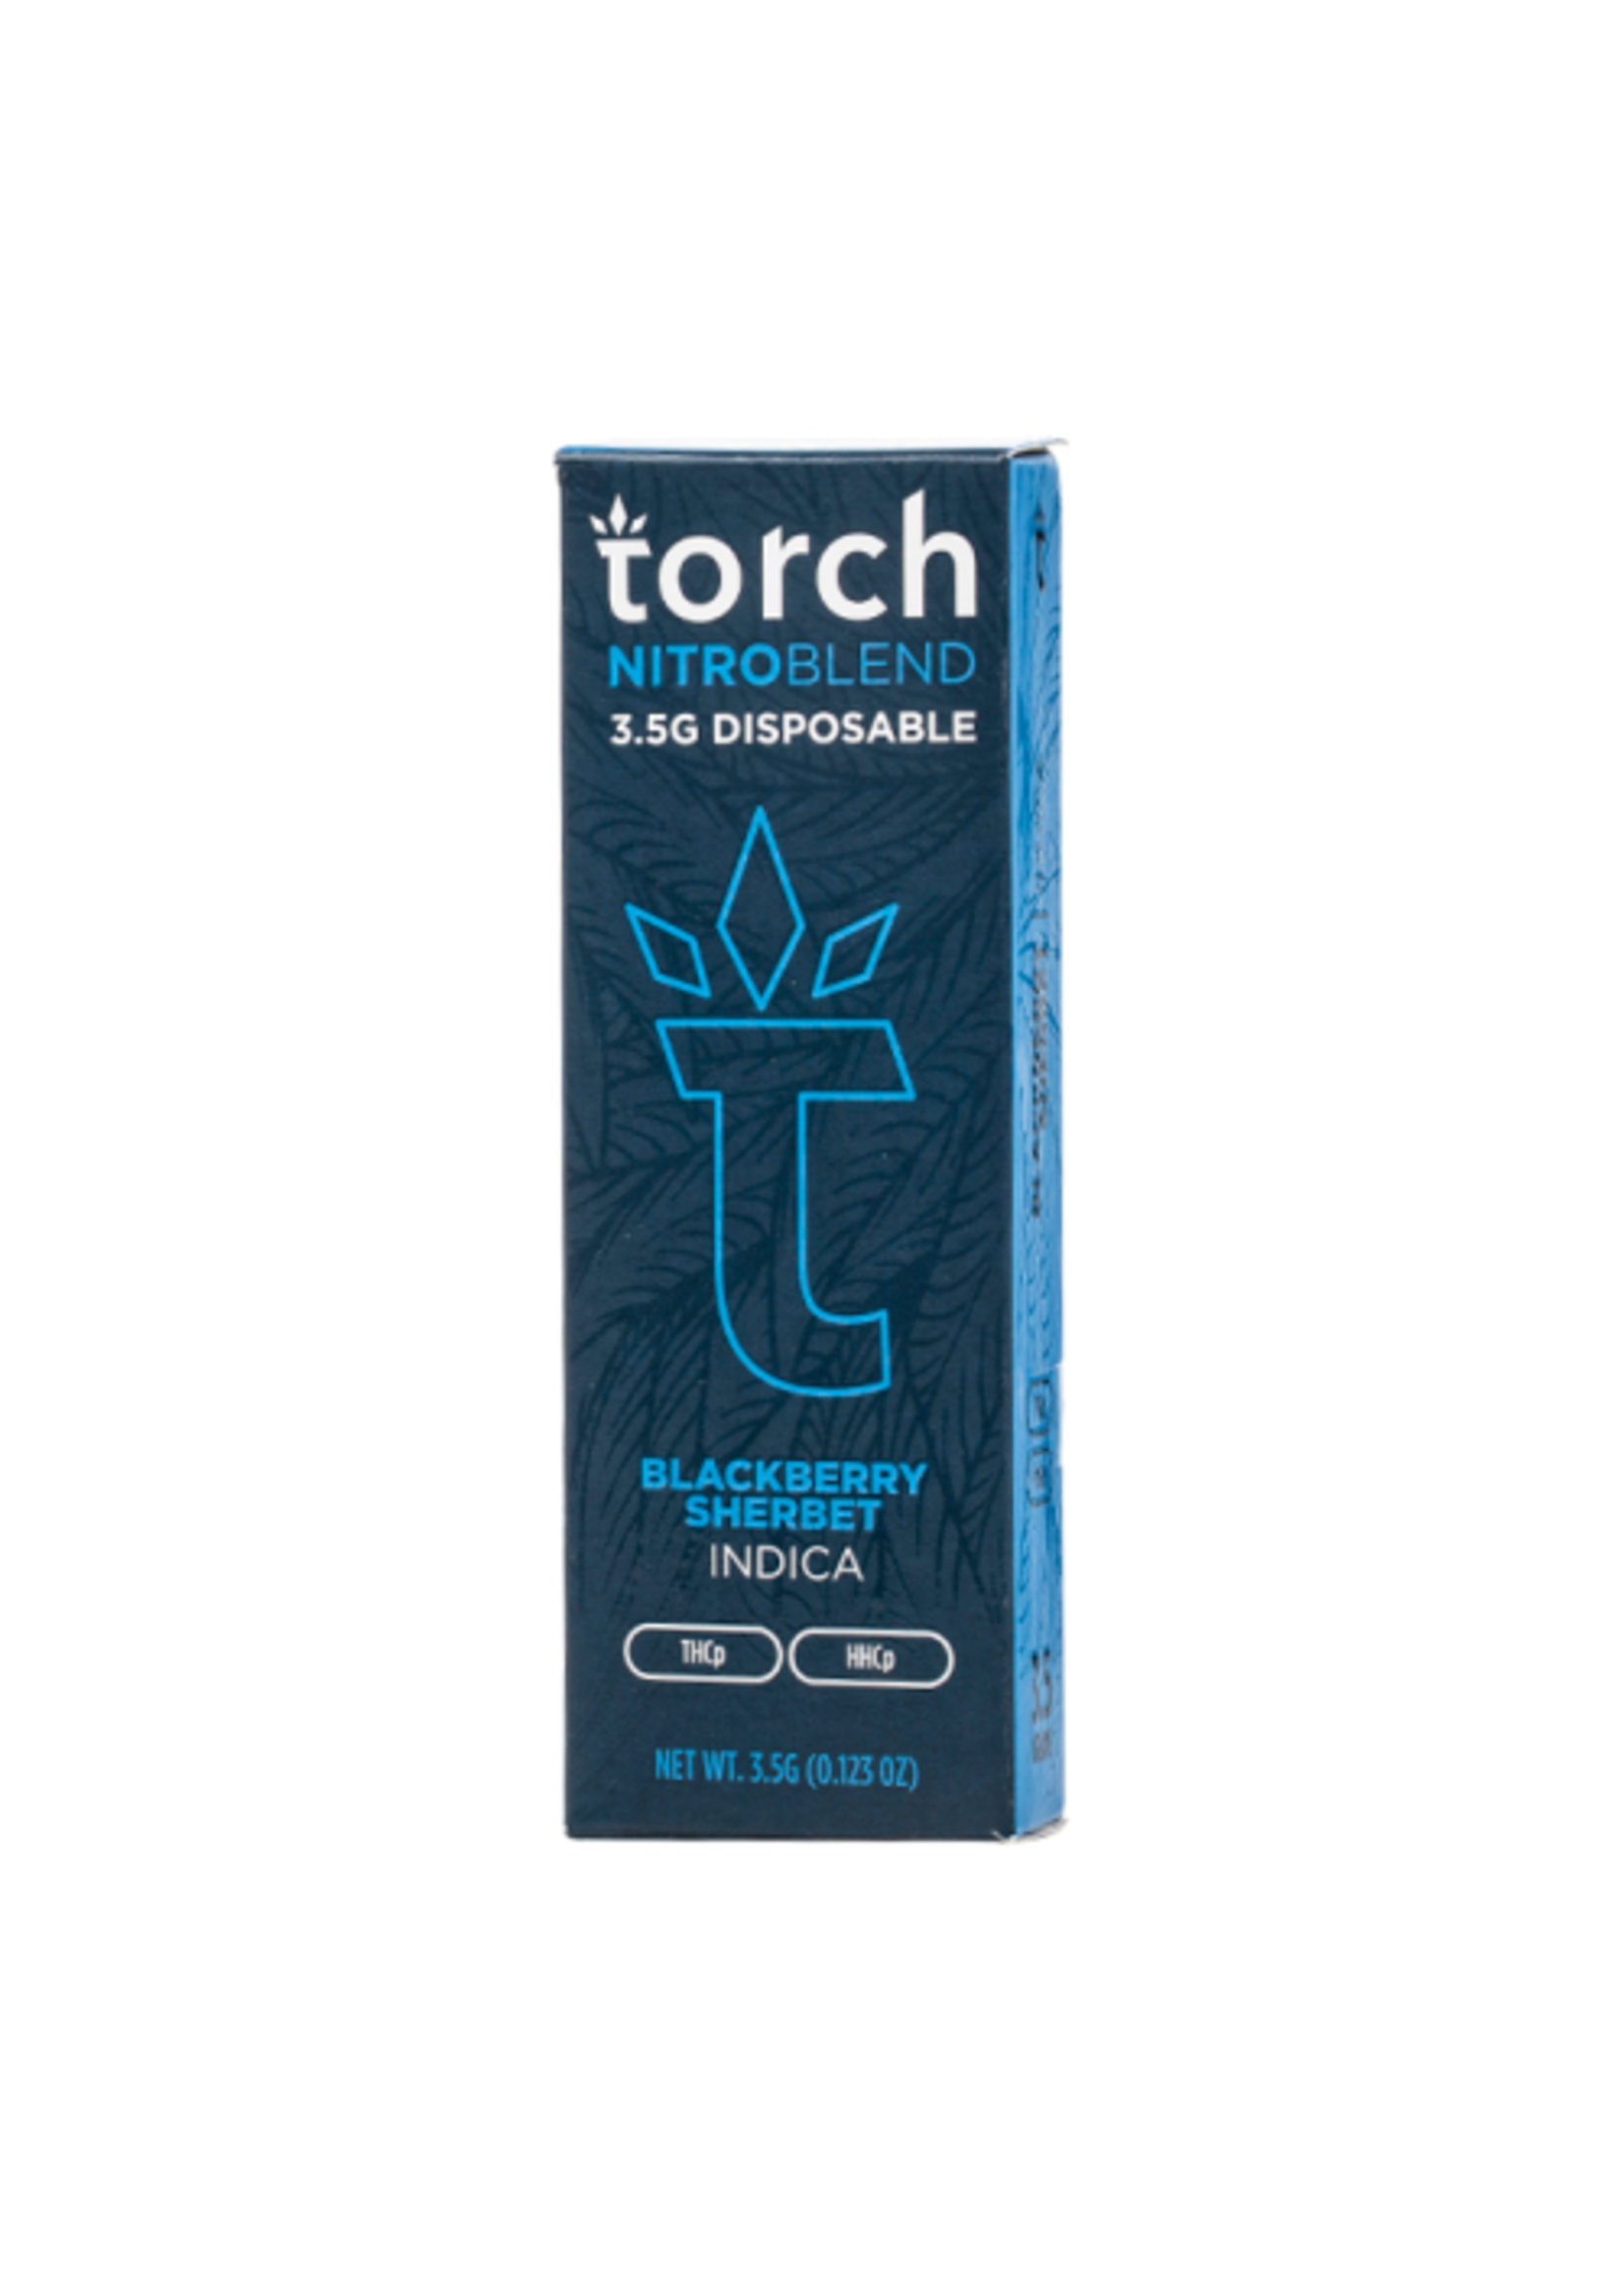 Torch Torch NitroBlend THCa Boosted 3.5g Disposable